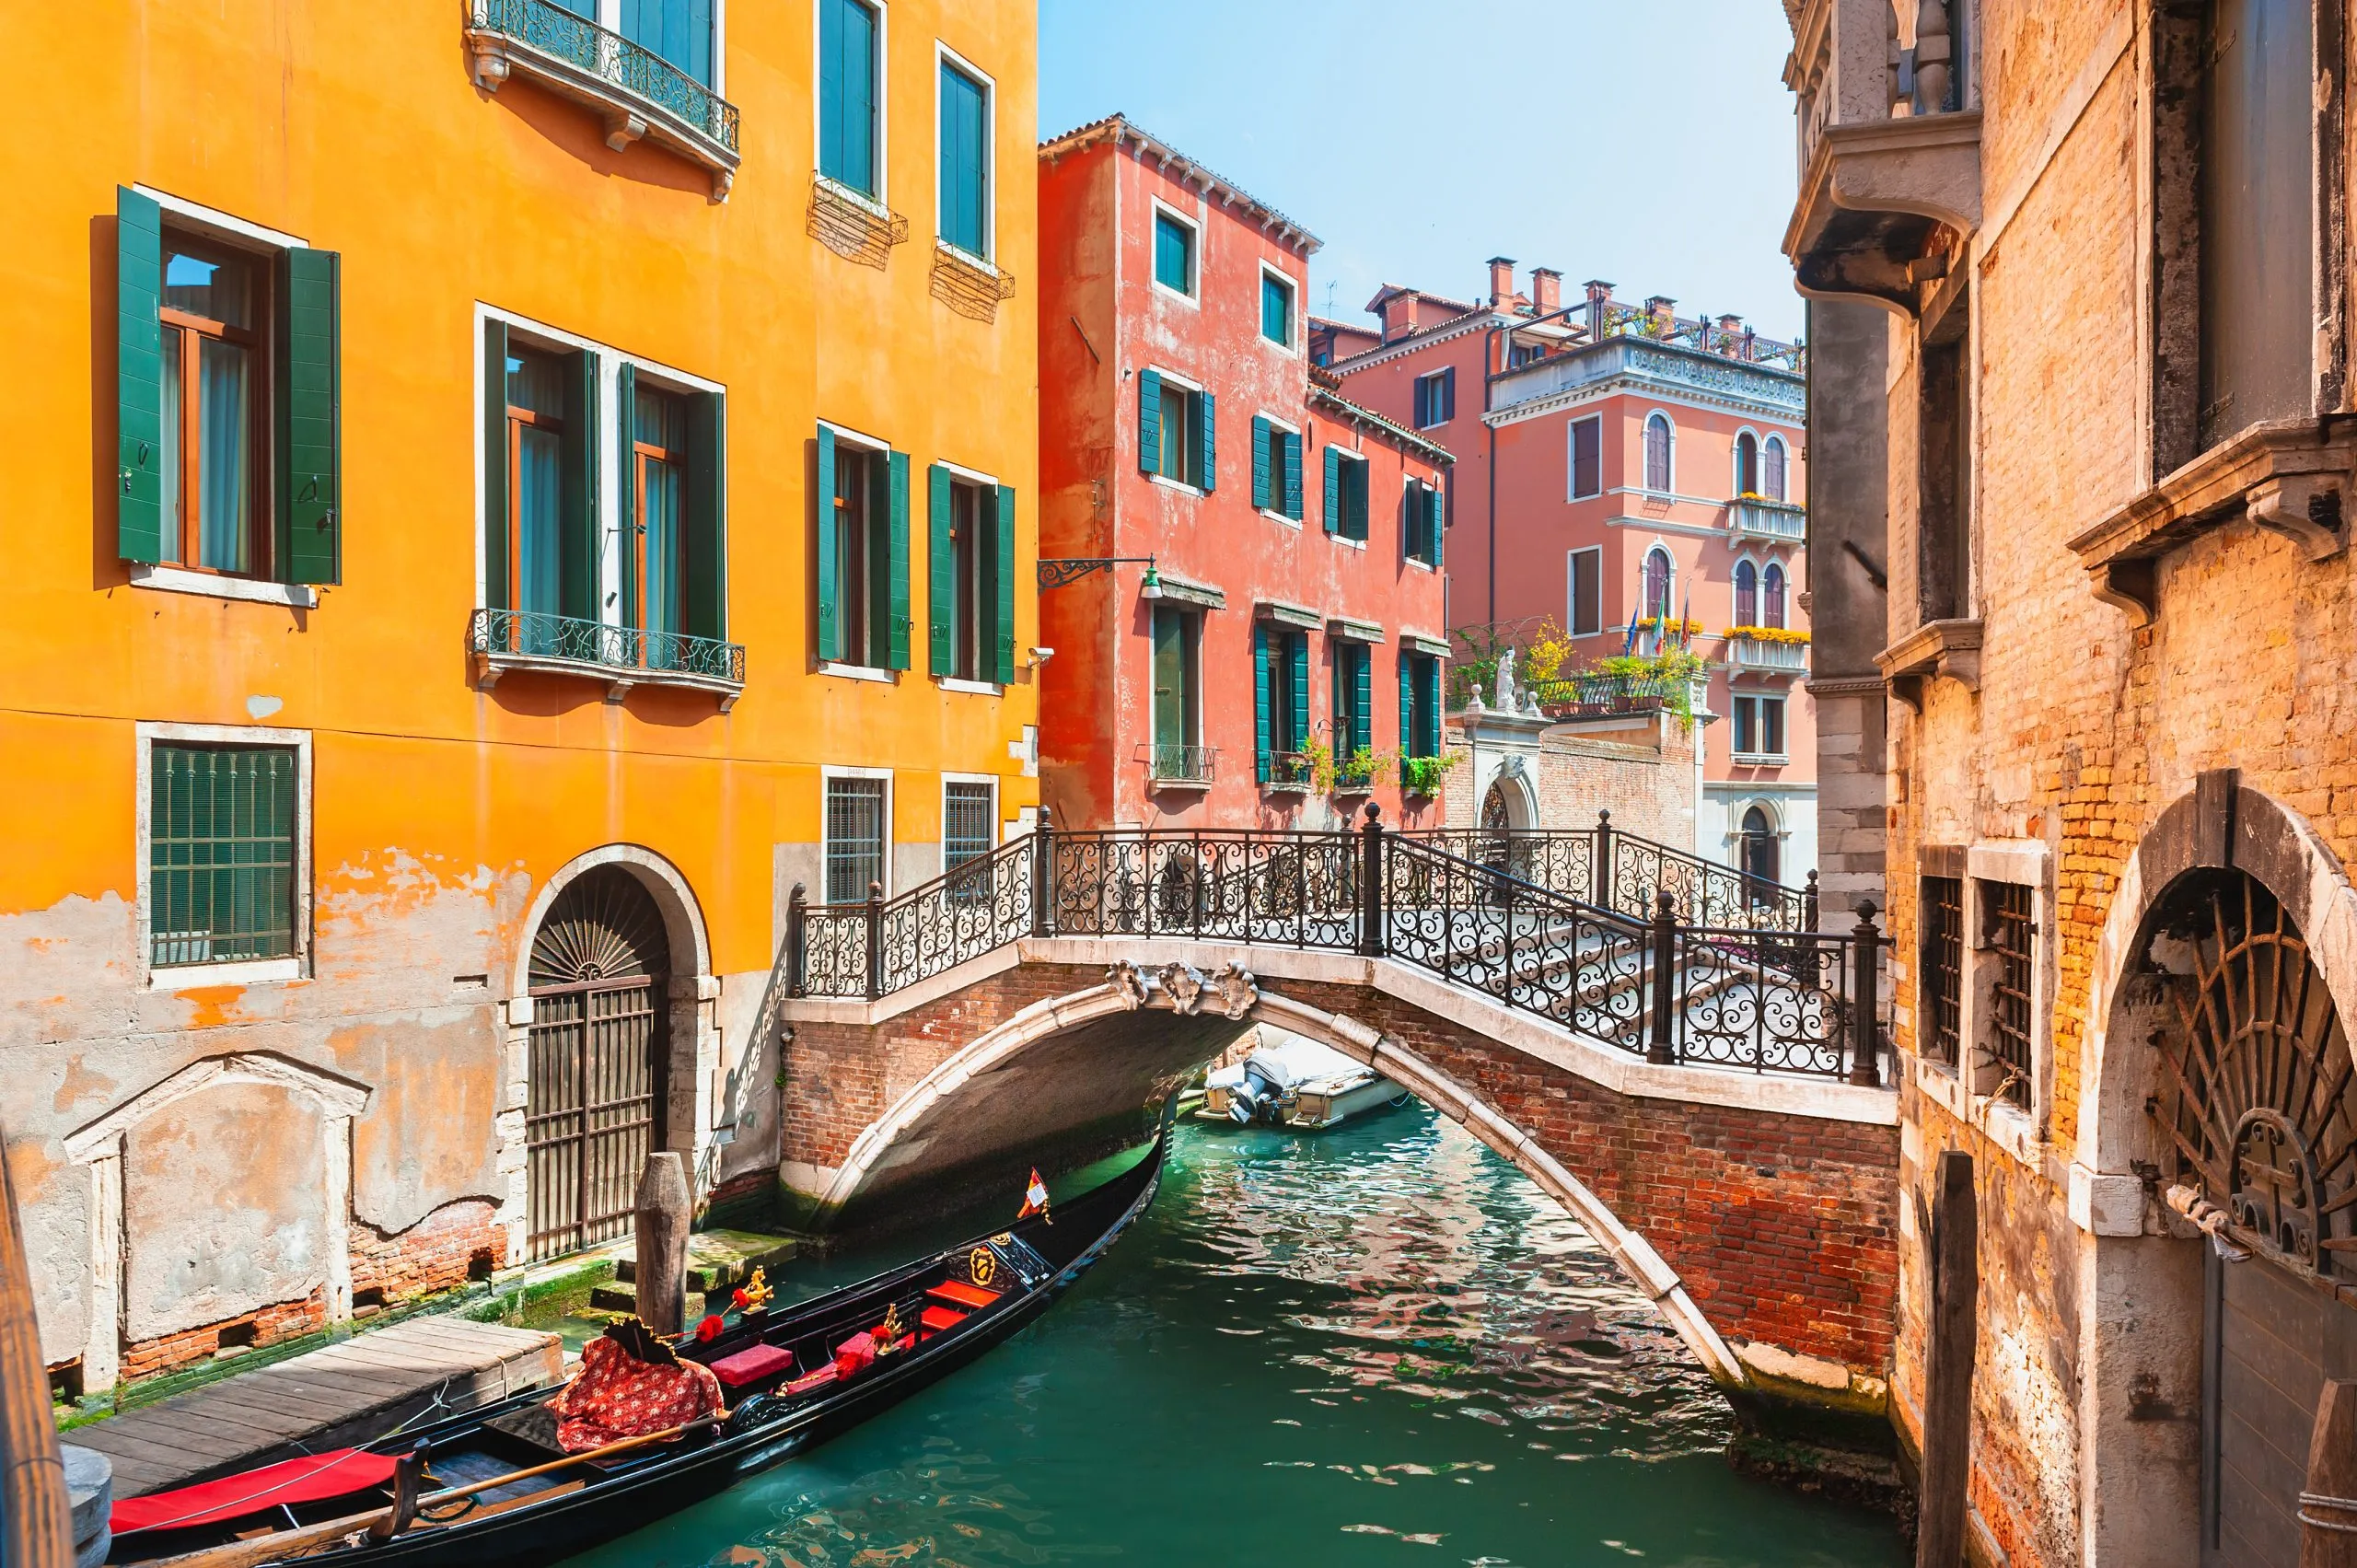 Beautiful canal with old medieval architecture and bridge in Venice, Italy. Famous travel destination